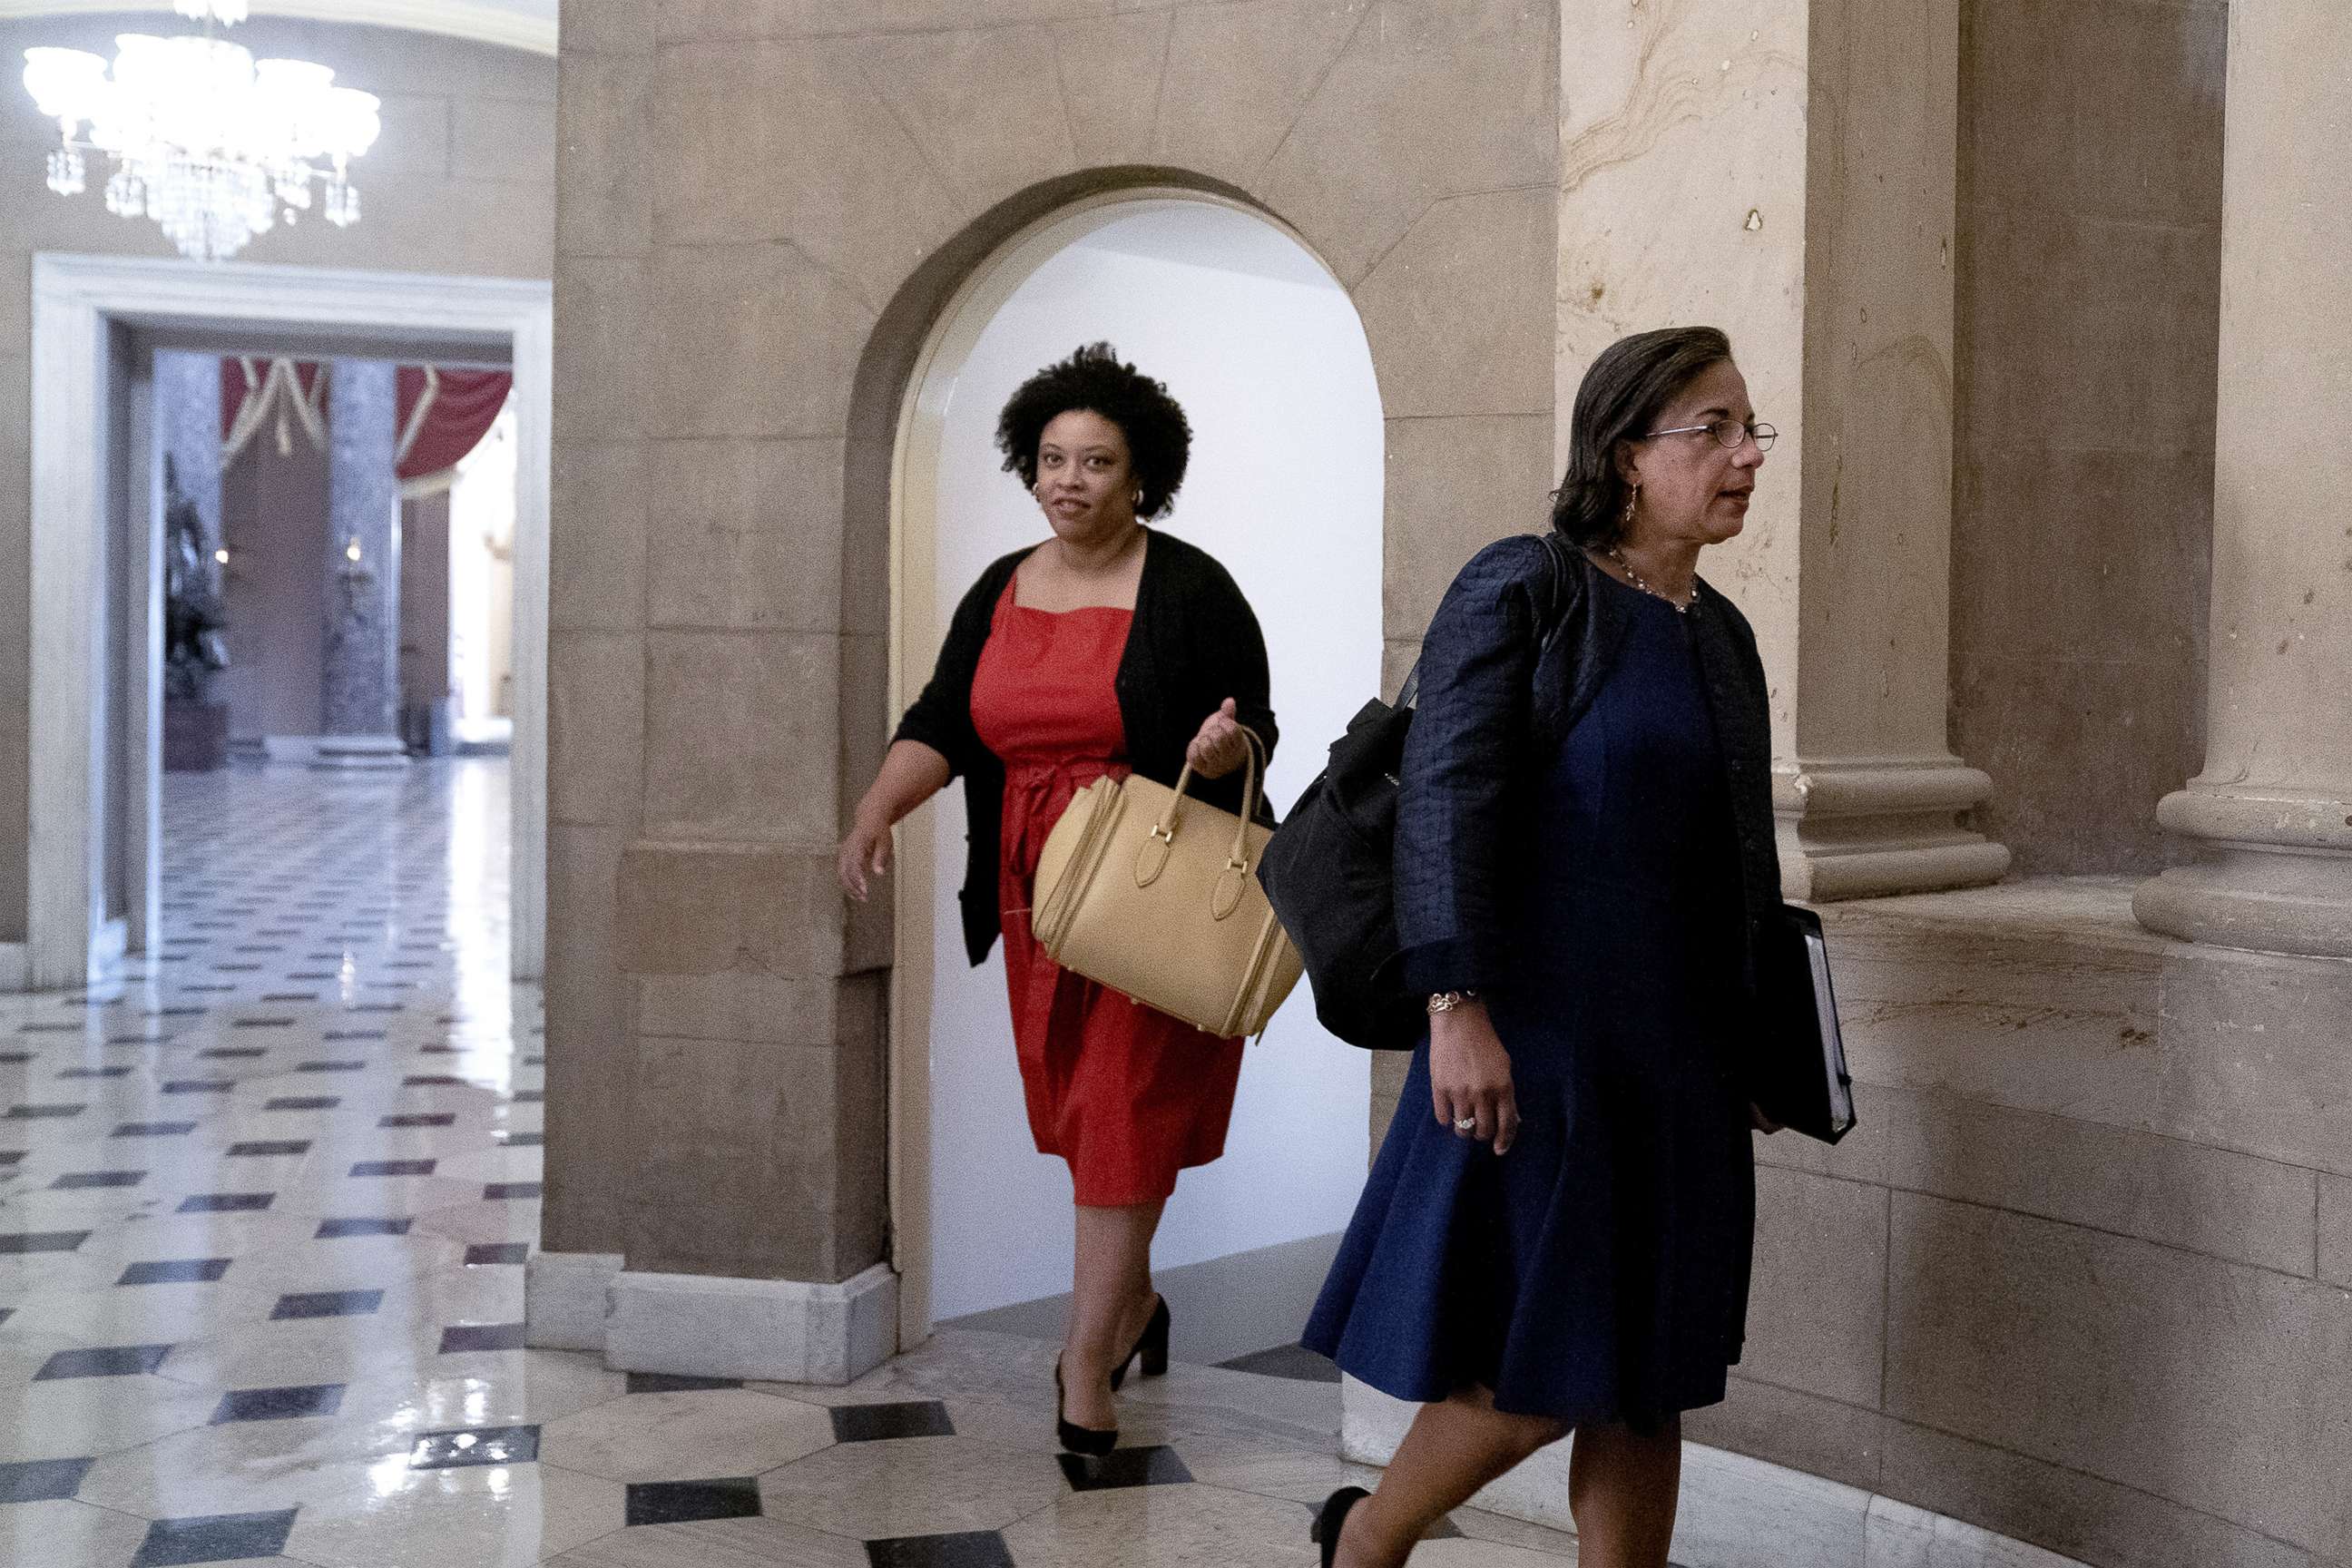 PHOTO: Shalanda Young, acting director of the Office of Management and Budget (OMB), left, arrives for a meeting, along with Susan Rice, Domestic Policy Council Director, right, at the U.S. Capitol in Washington, D.C., June 23, 2021.